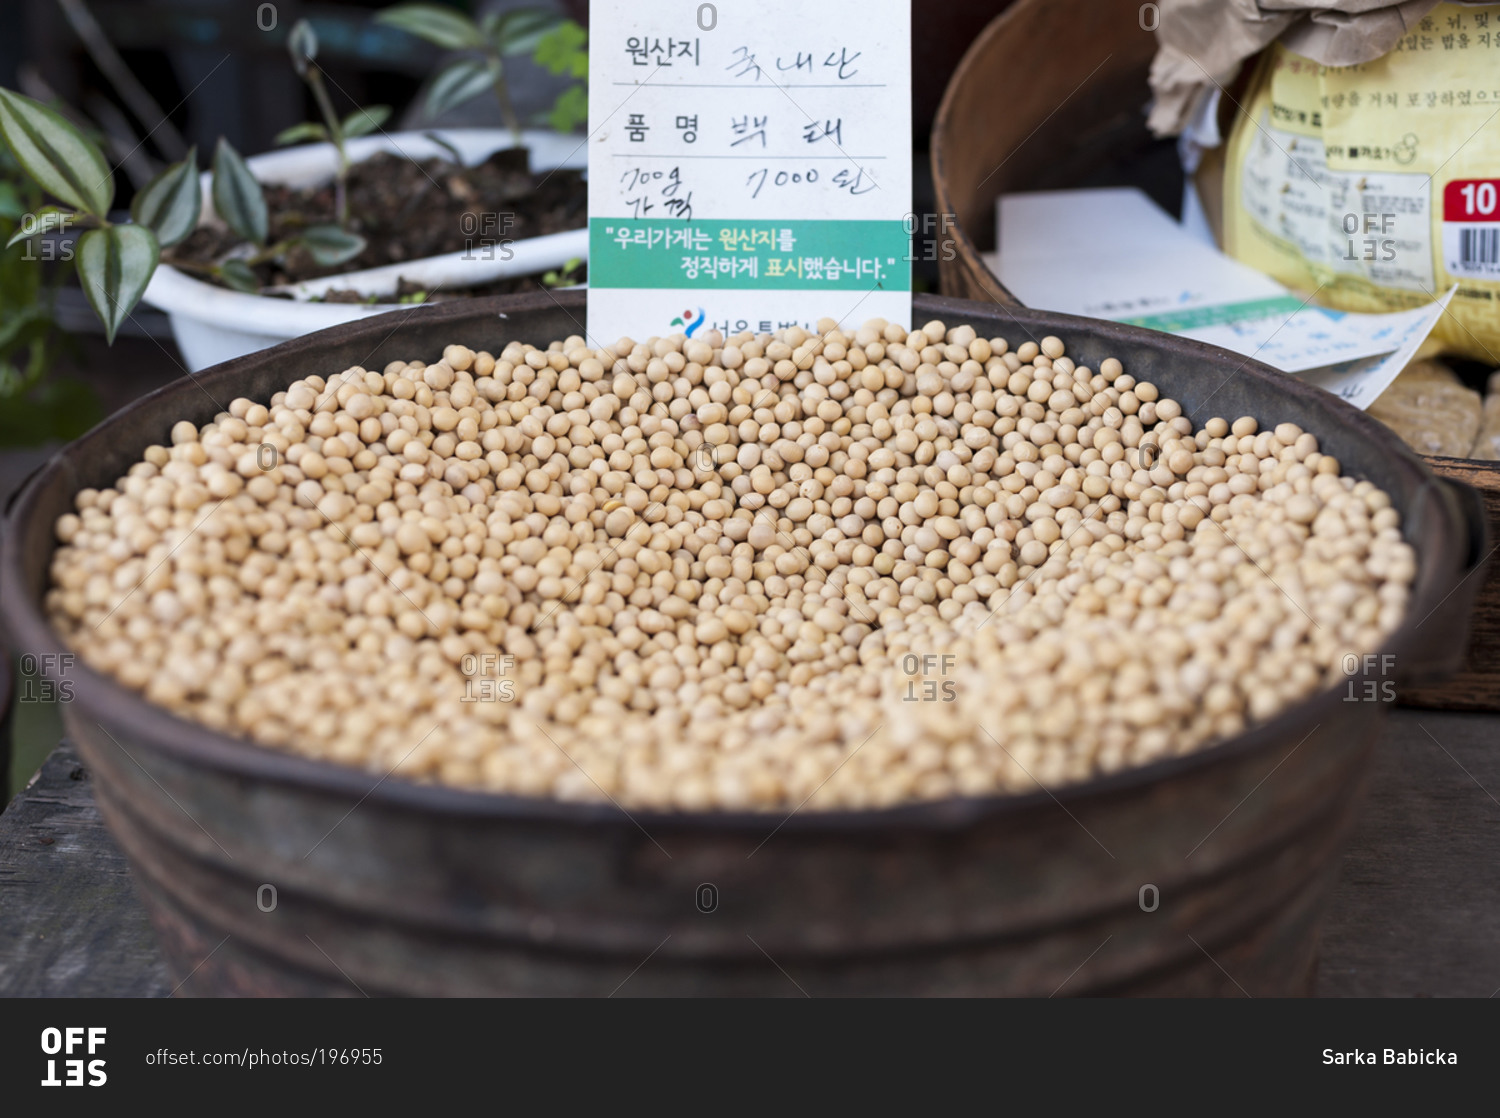 Dried soybeans for sale at a Korean market